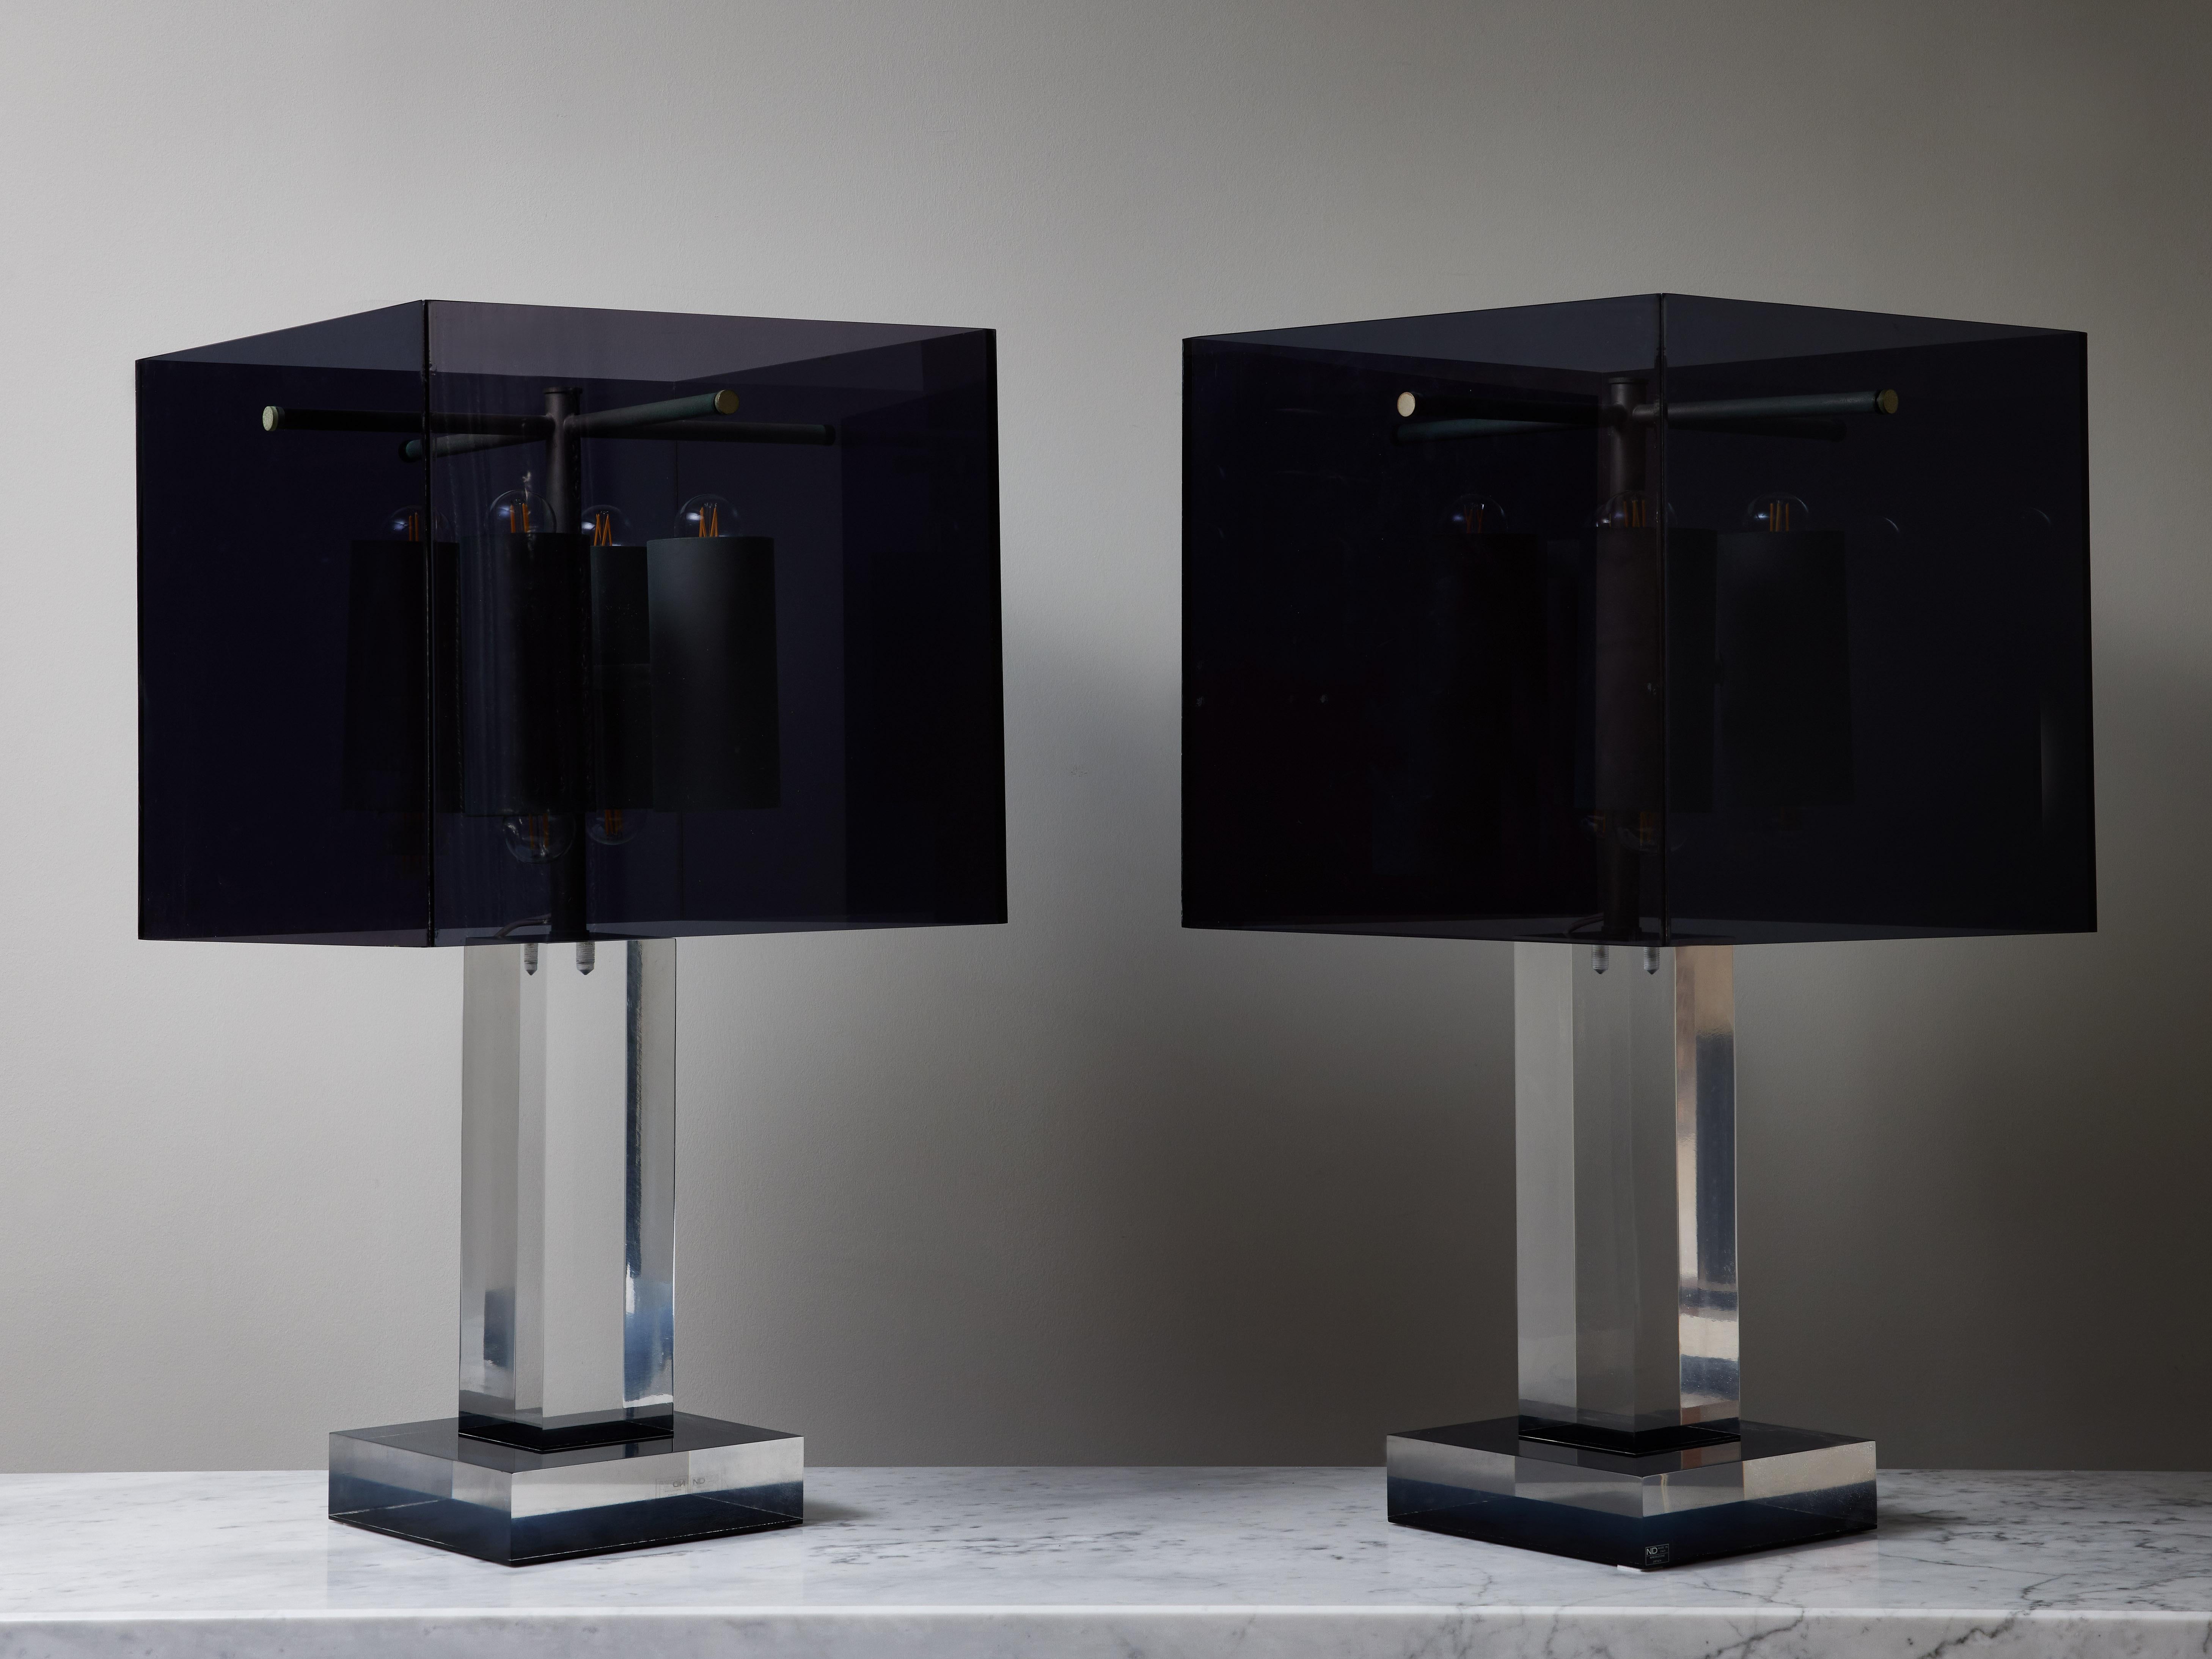 Pair of imposing square table lamps made of clear lucite body and dark grey lucite lampshade. These have height lights per lamp allowing them to provide quite a lot of light despite the dark shade.

Original sticker of the manufacturer on the